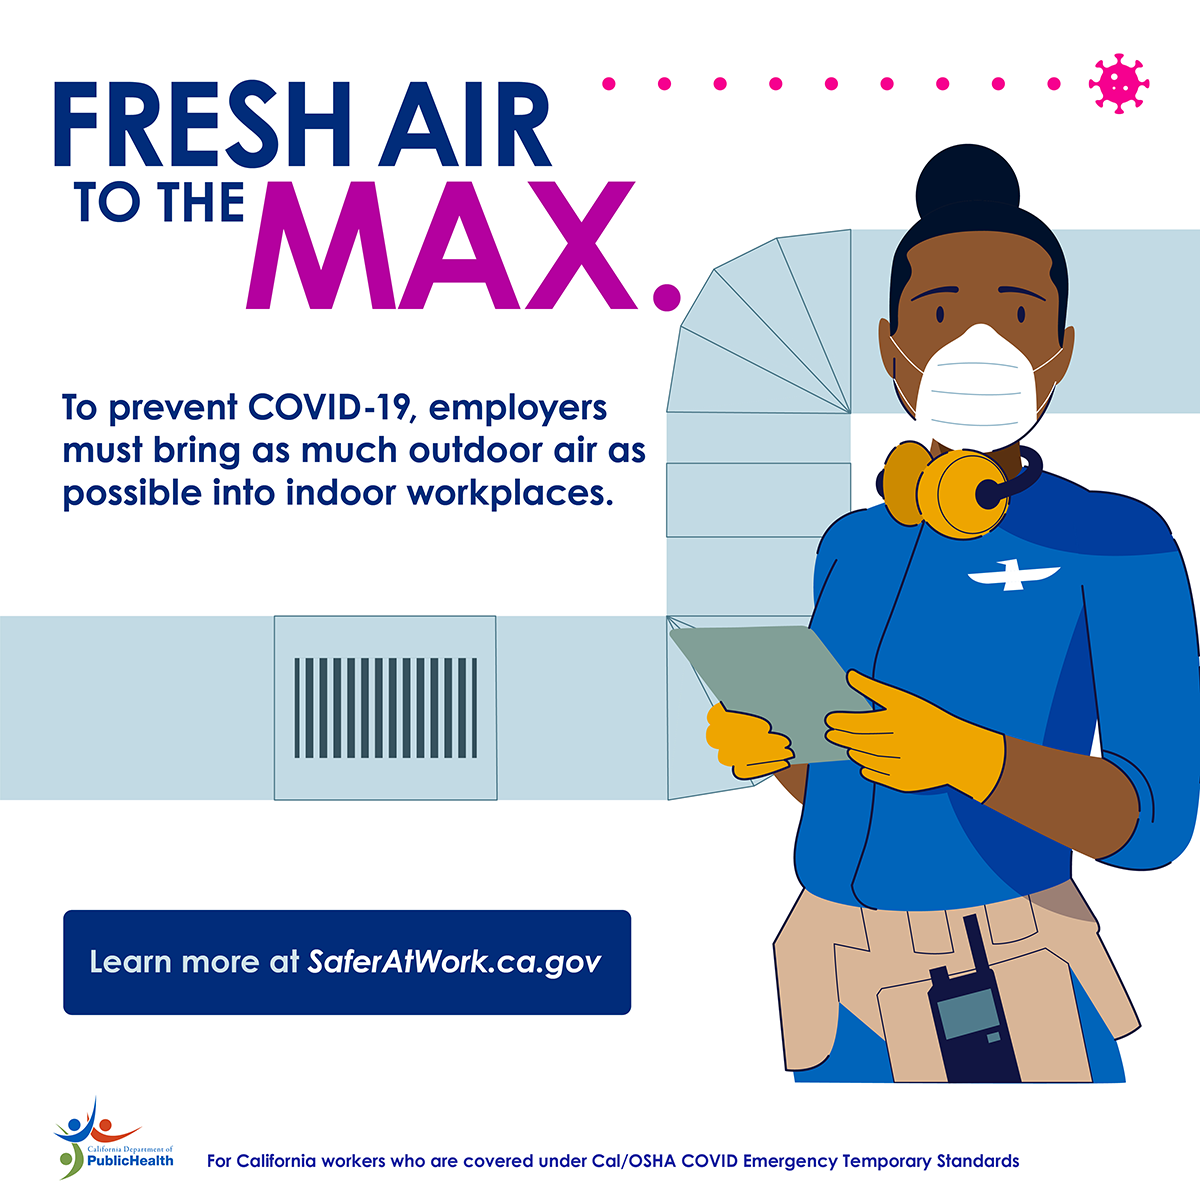 Fresh air to the max. To prevent COVID-19, employers must bring as much outdoor air as possible into indoor workplaces.